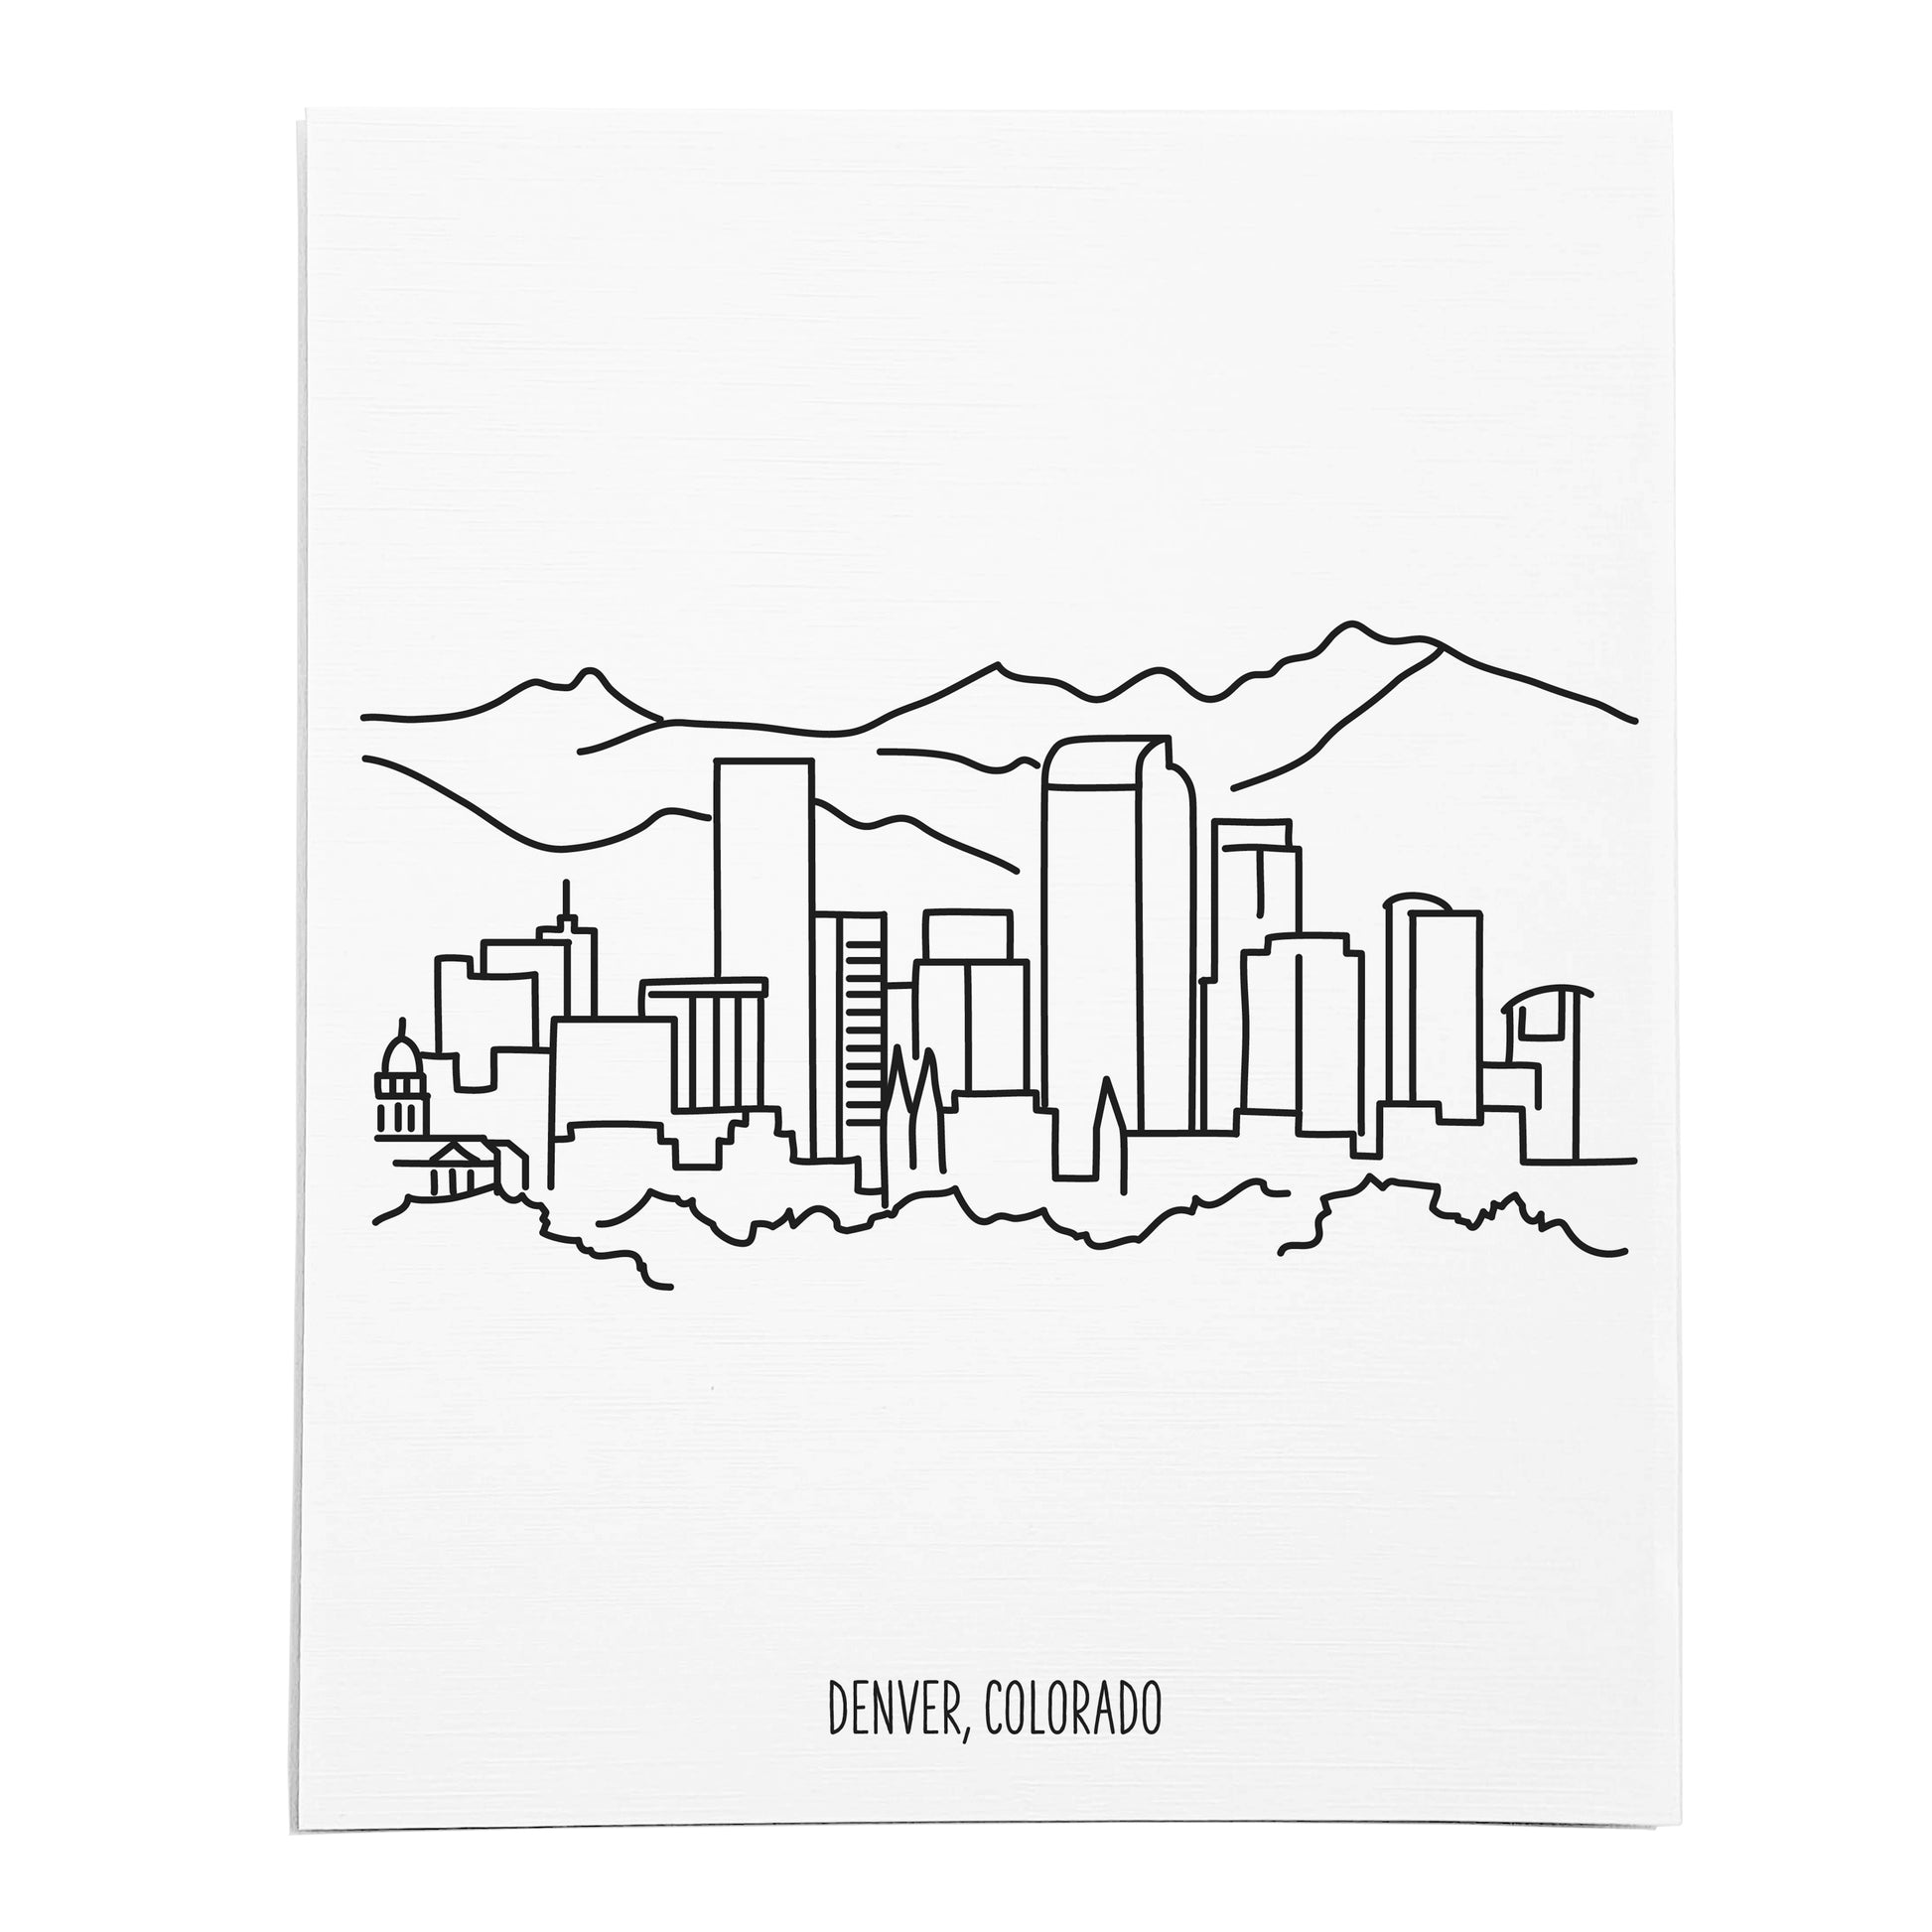 An art print featuring a line drawing of the Denver Skyline on white linen paper